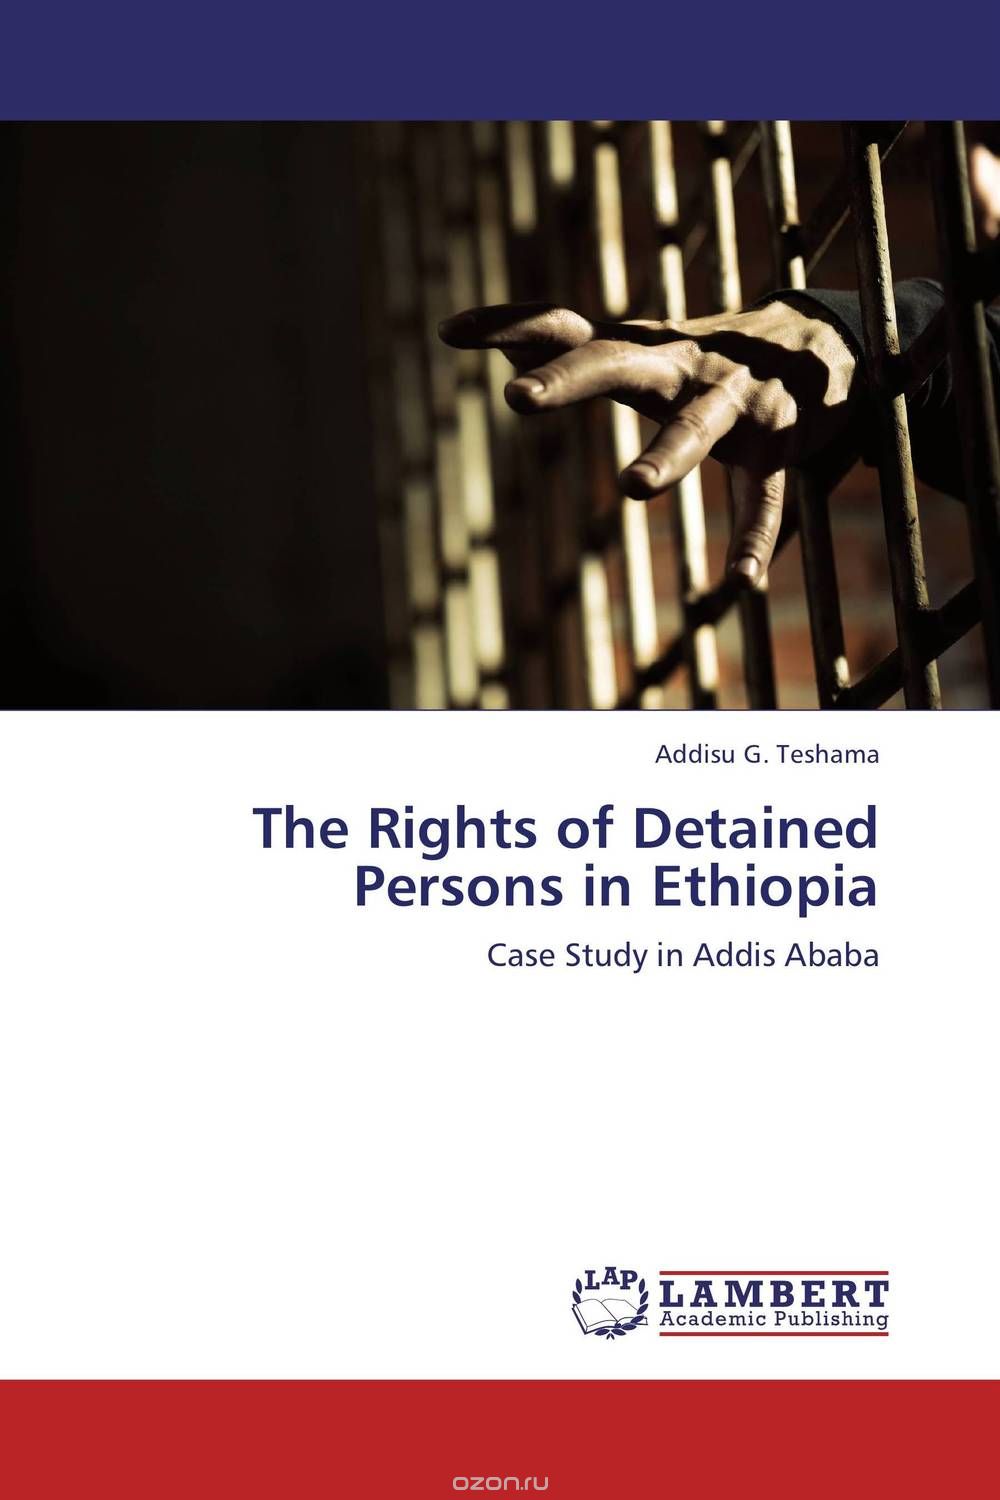 Скачать книгу "The Rights of Detained Persons in Ethiopia"